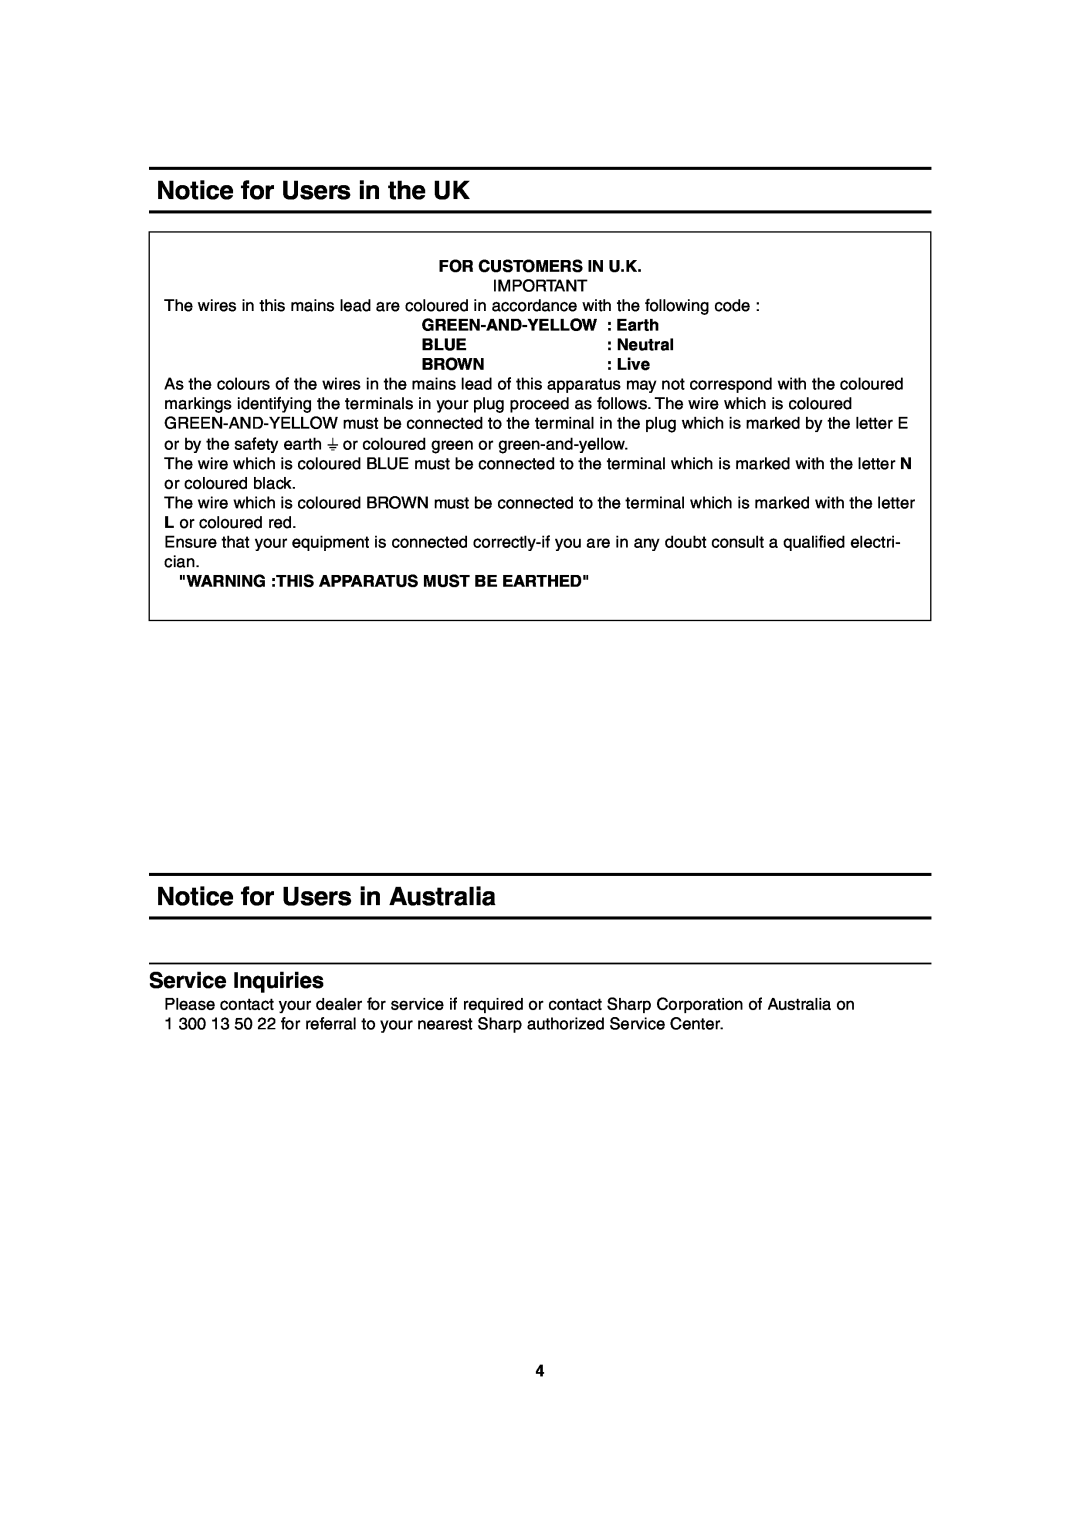 Sharp LL-T2020 Notice for Users in the UK, Notice for Users in Australia, Service Inquiries, For Customers In U.K, Blue 